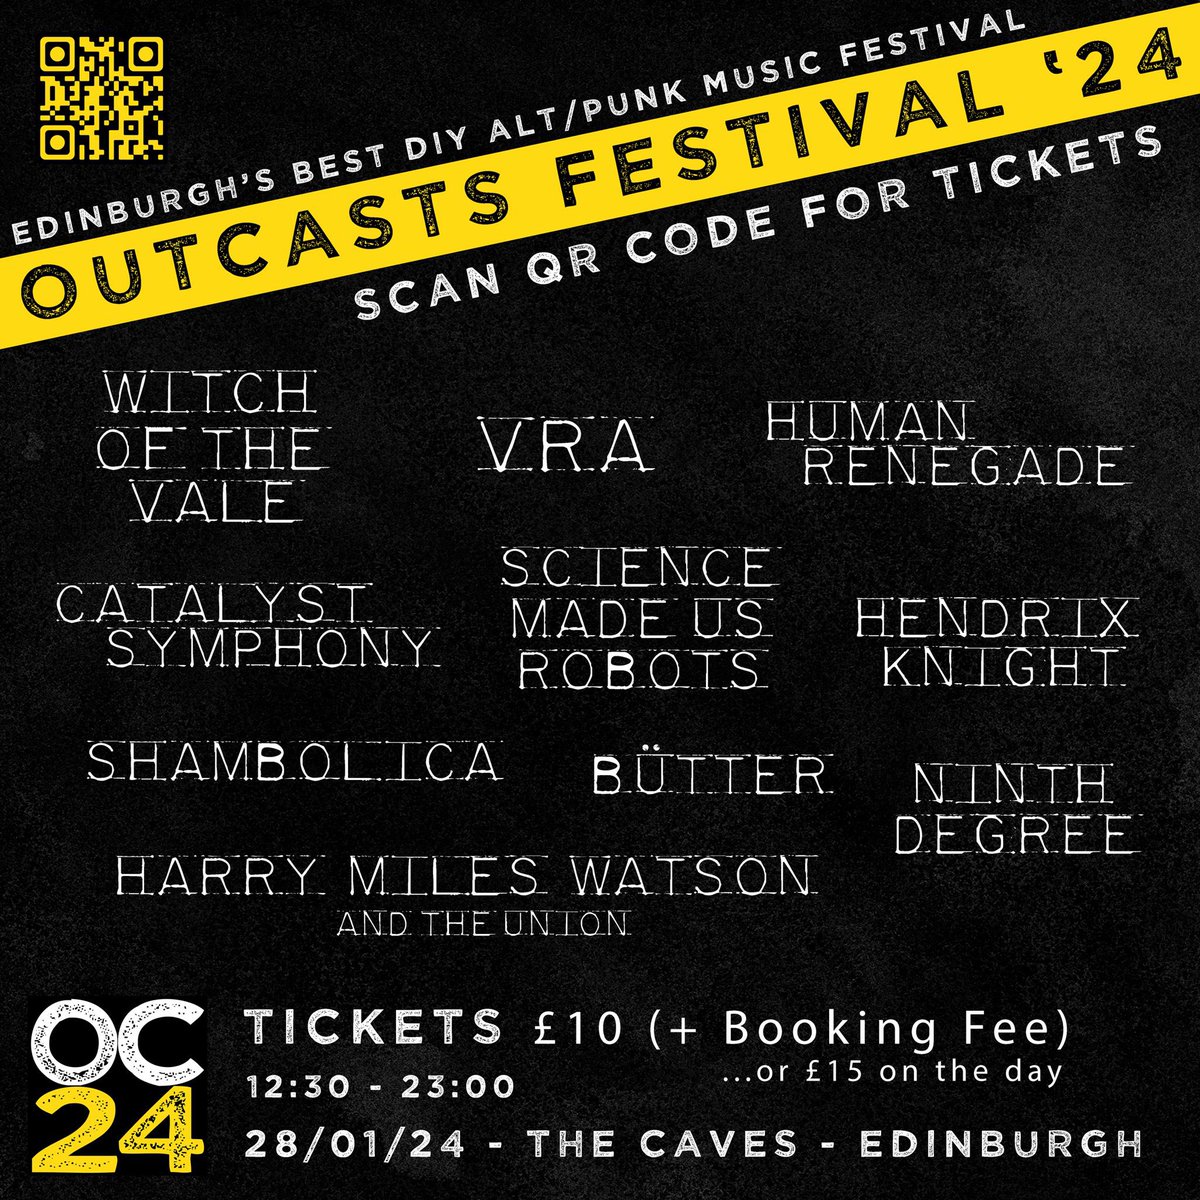 OUR FIRST FESTIVAL !!! :)) we’ll be back in Edinburgh on January 28 for Outcasts Fest ‘24 📍The Caves, Edinburgh Time - 12:30-11pm